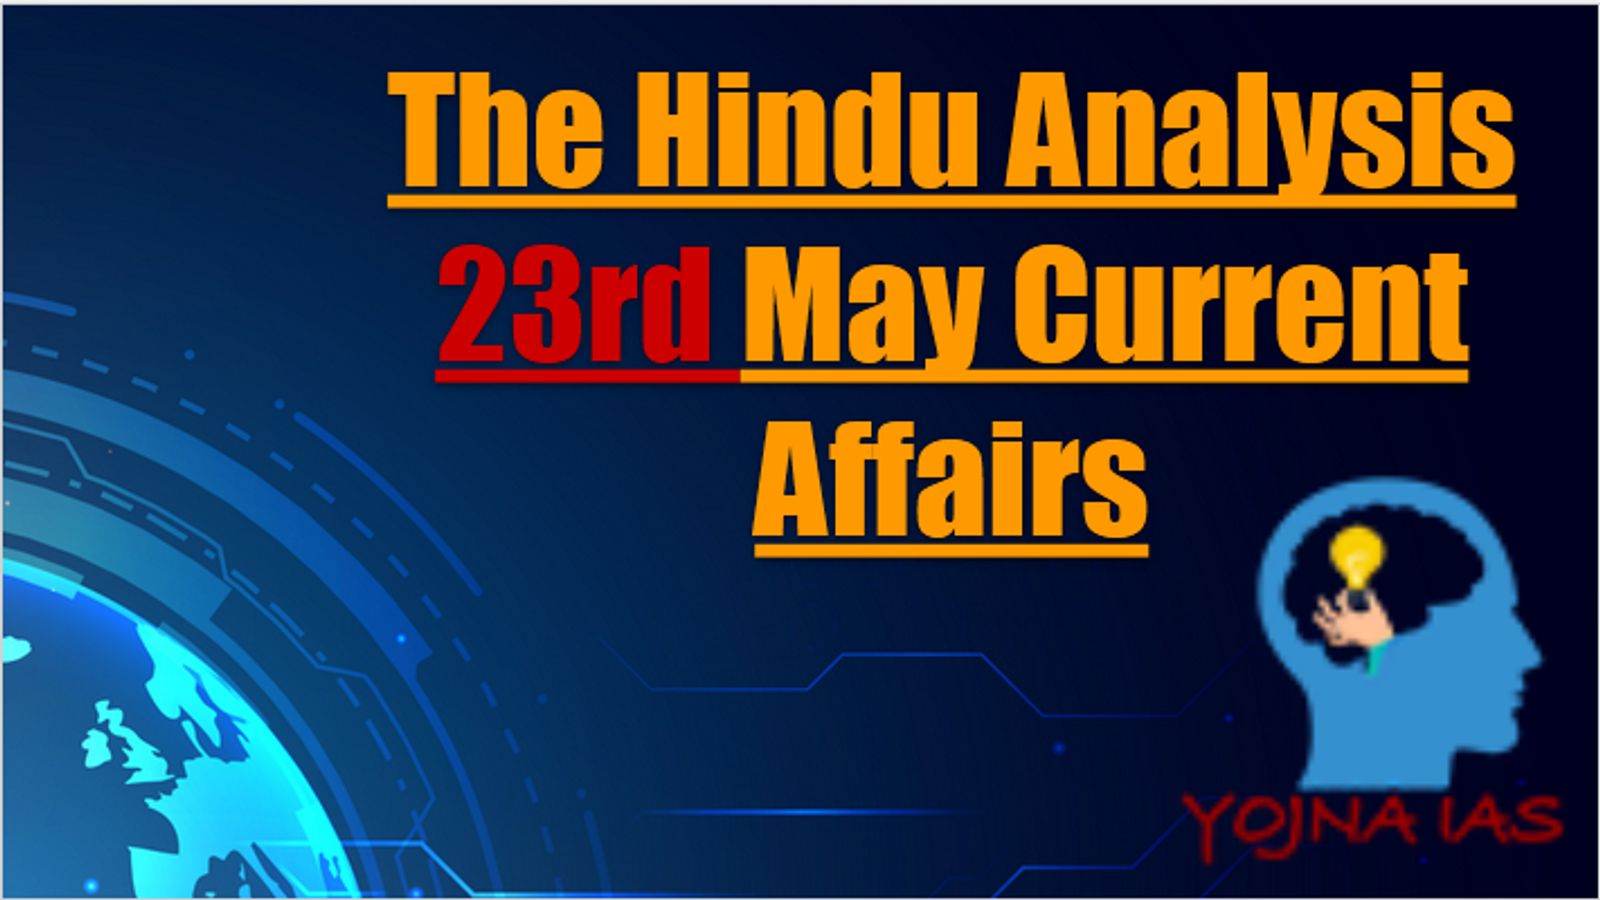 Today Current Affairs 23 May